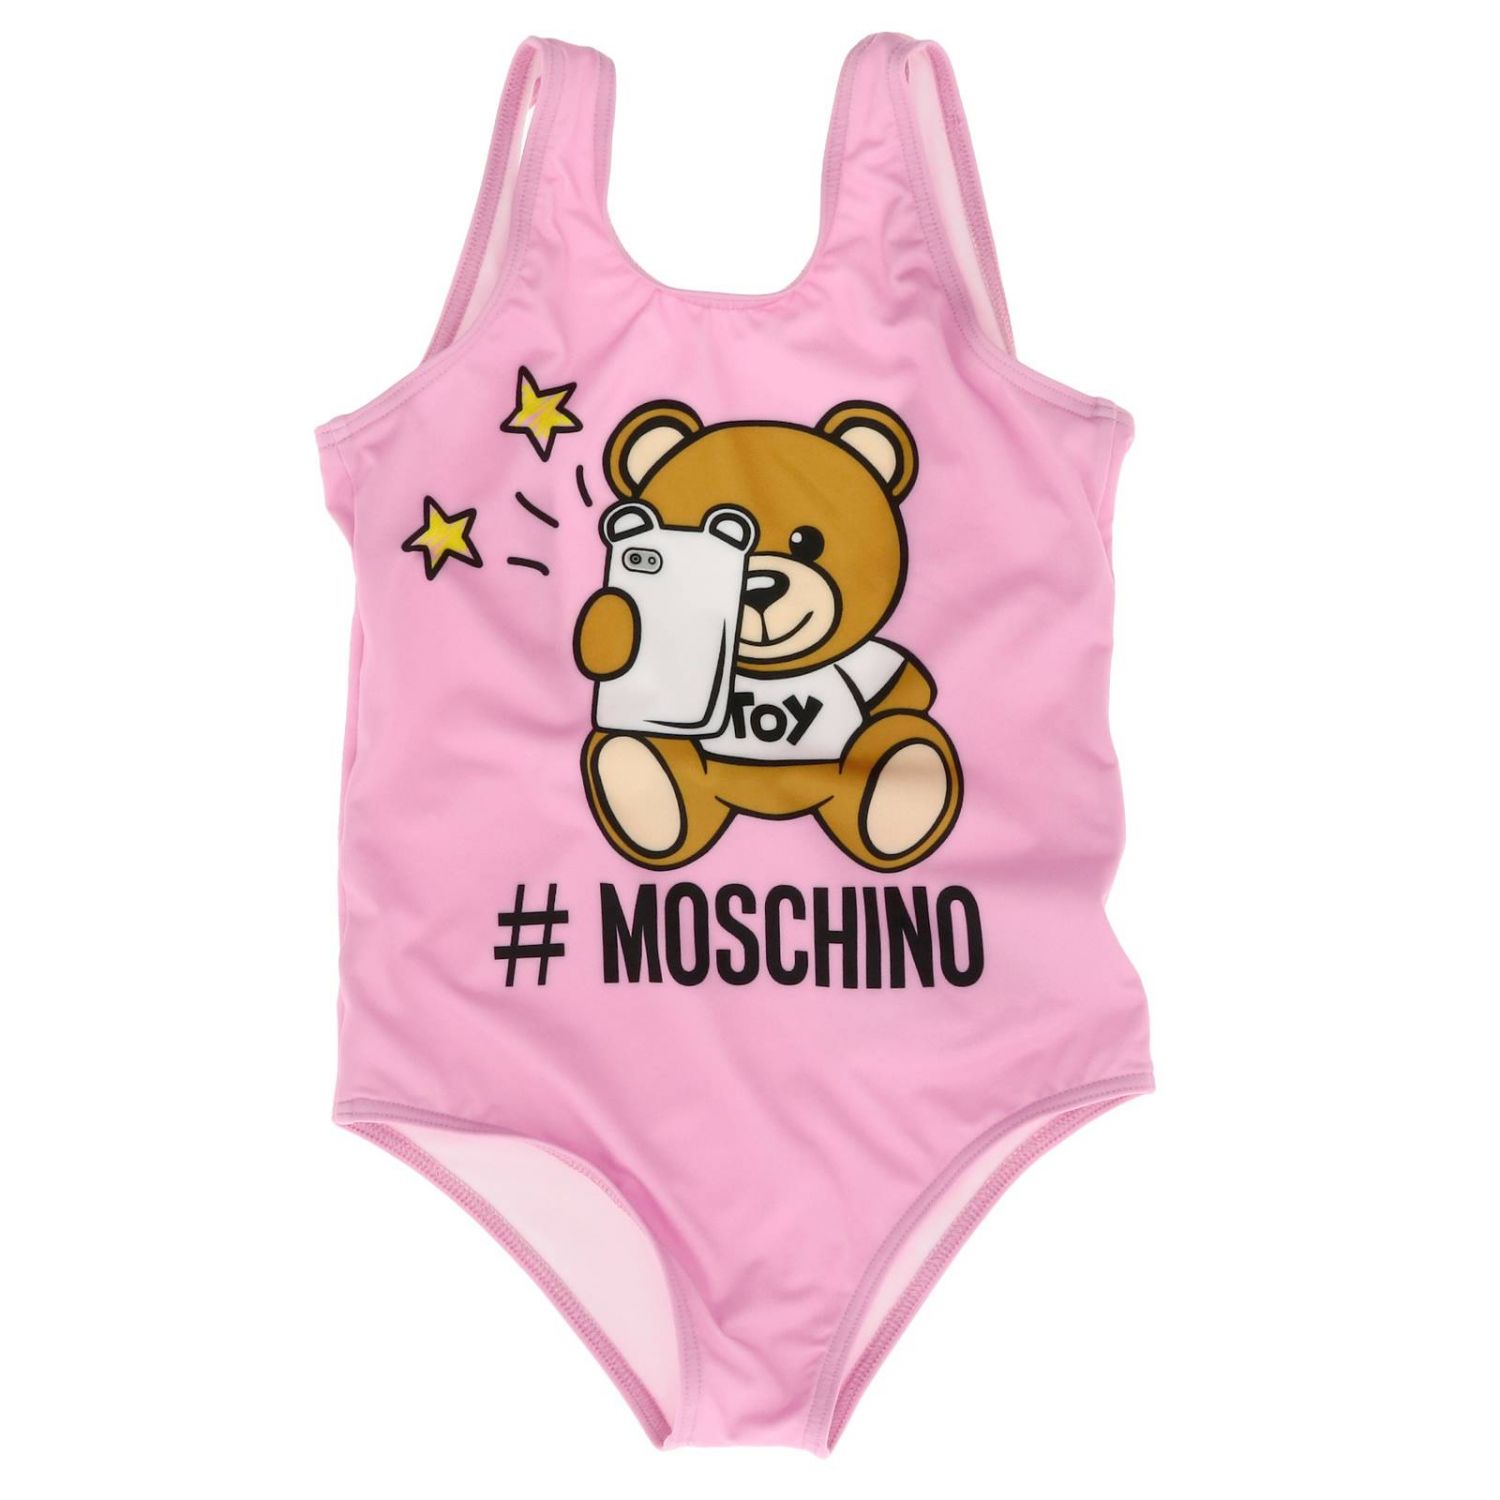 Moschino Kid Outlet: Swimsuit kids 